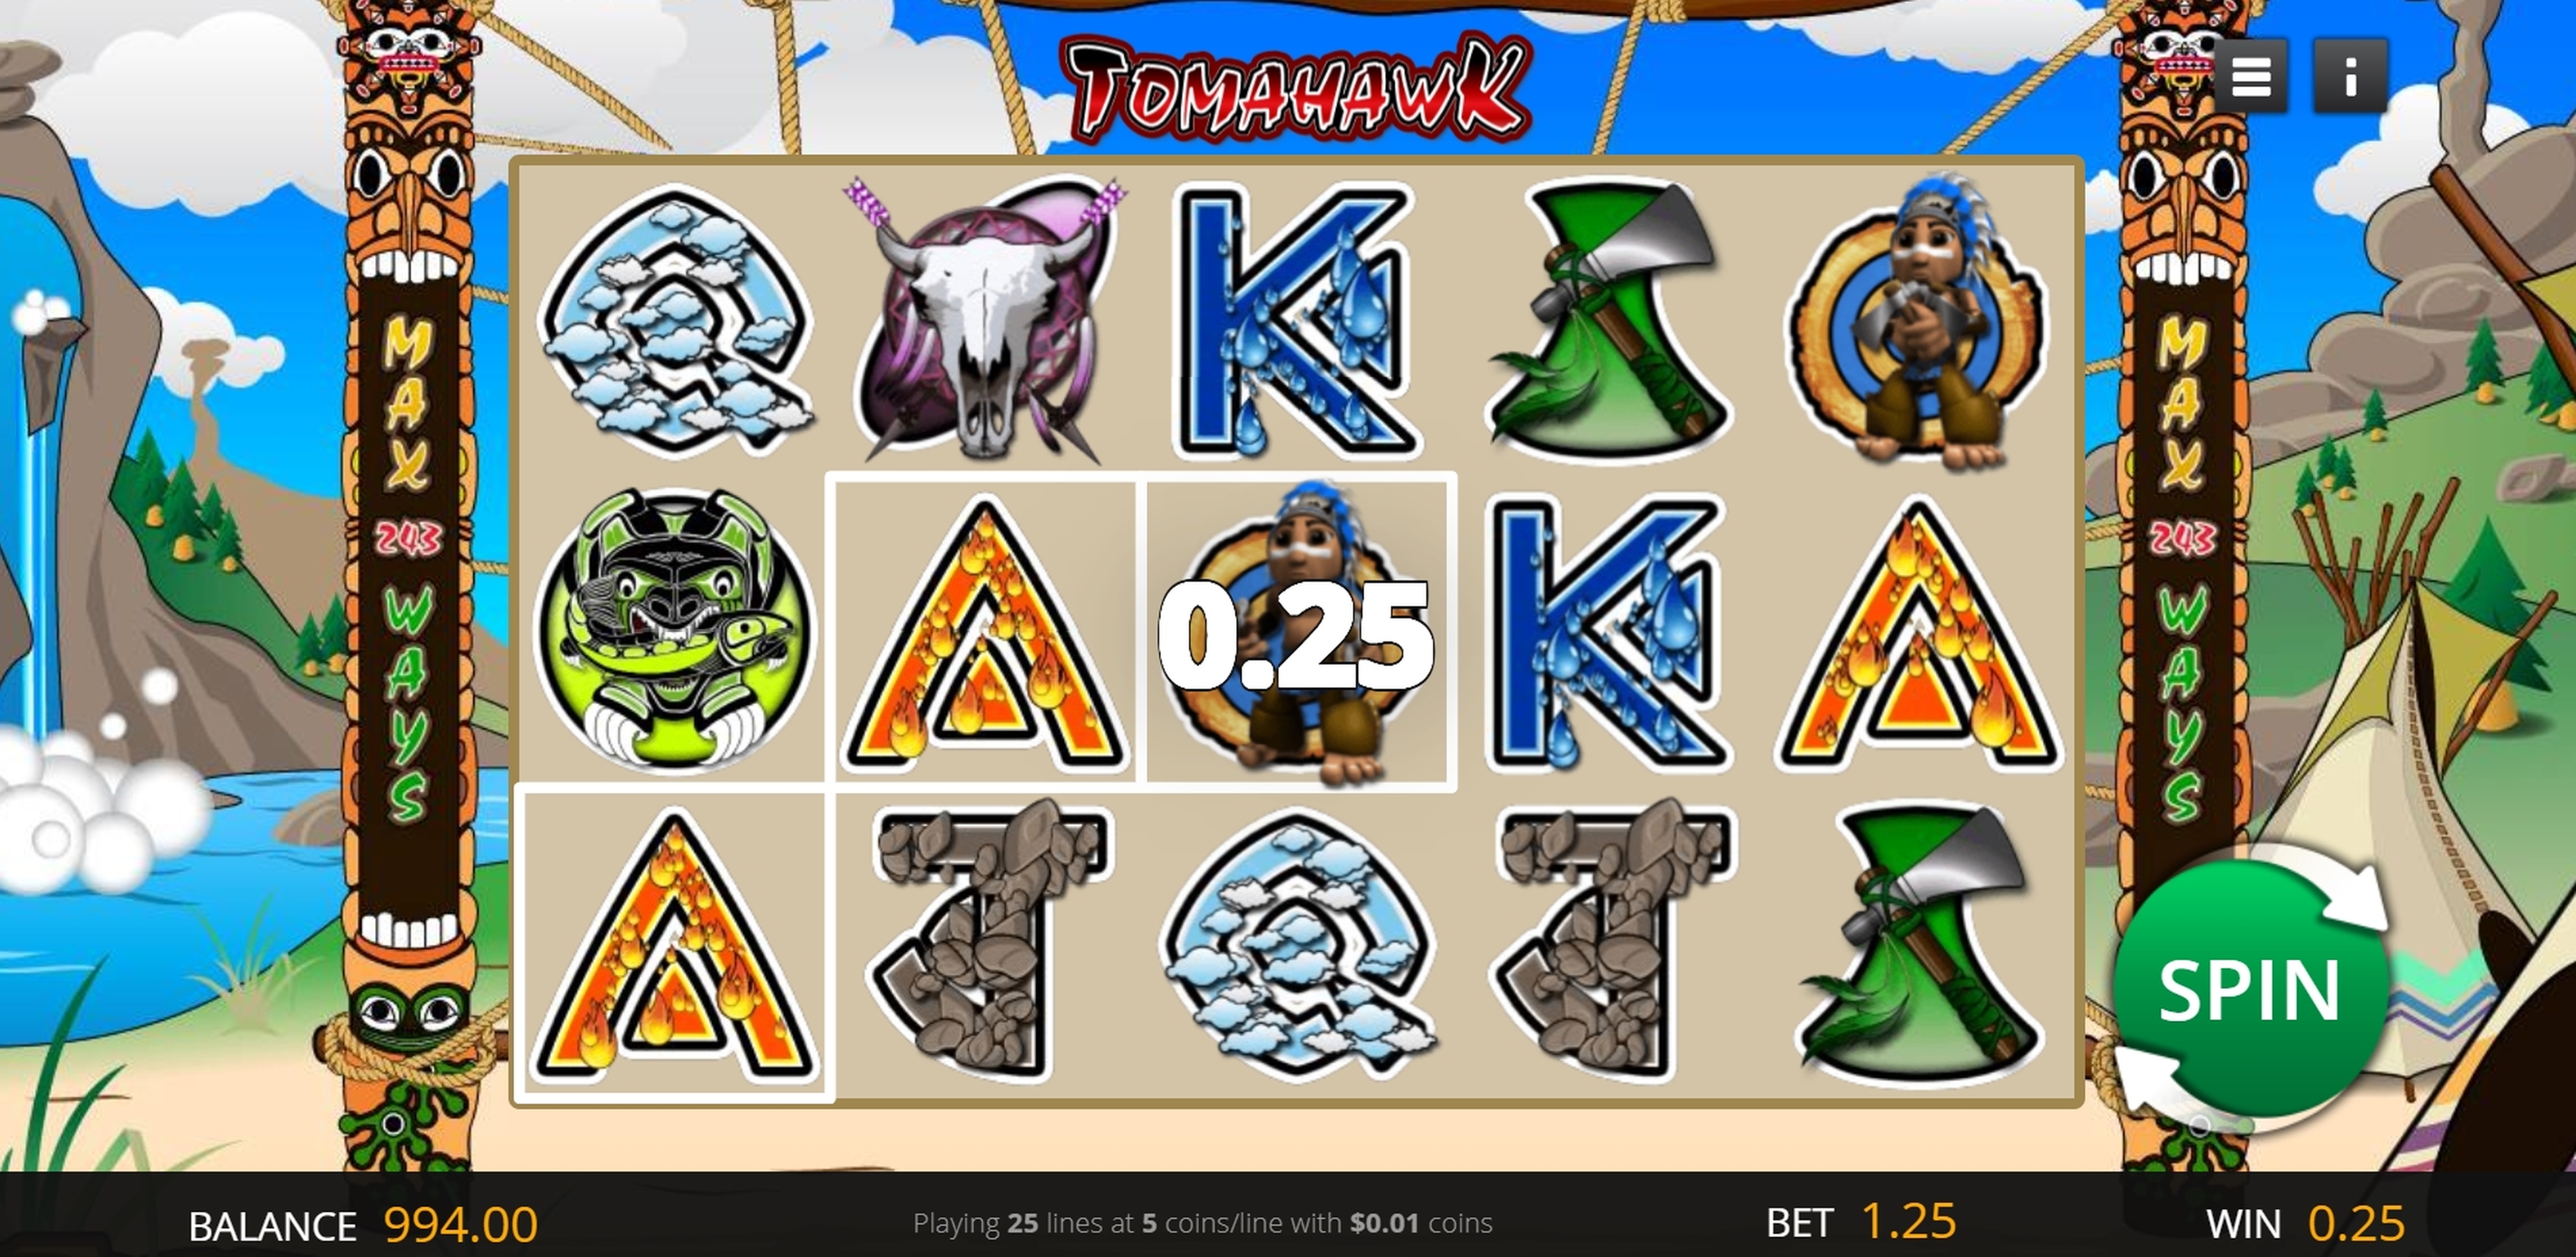 Win Money in Tomahawk Free Slot Game by Genii